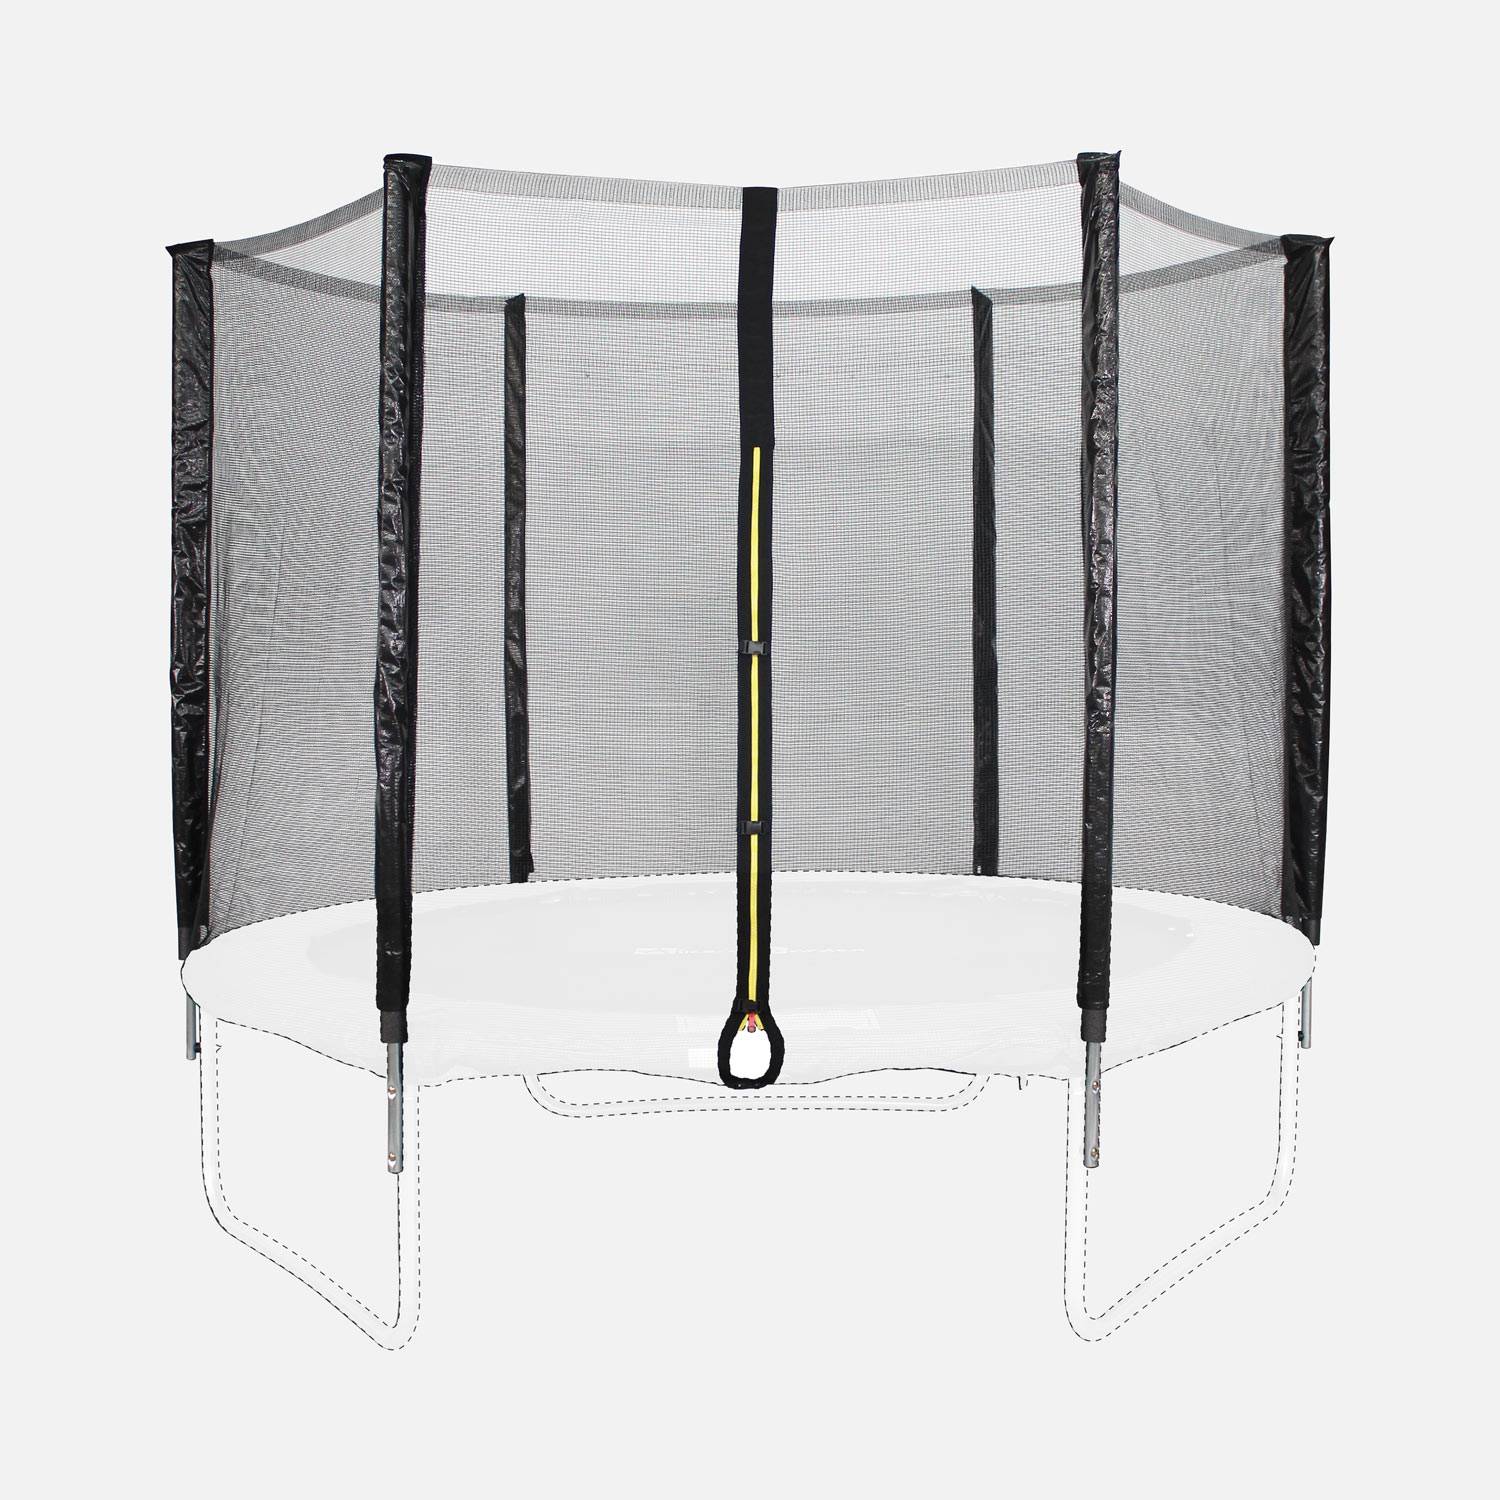 Net replacement kit for trampoline safety - ANTARES OUTER - for Pluton Ø8ft trampolines Photo2